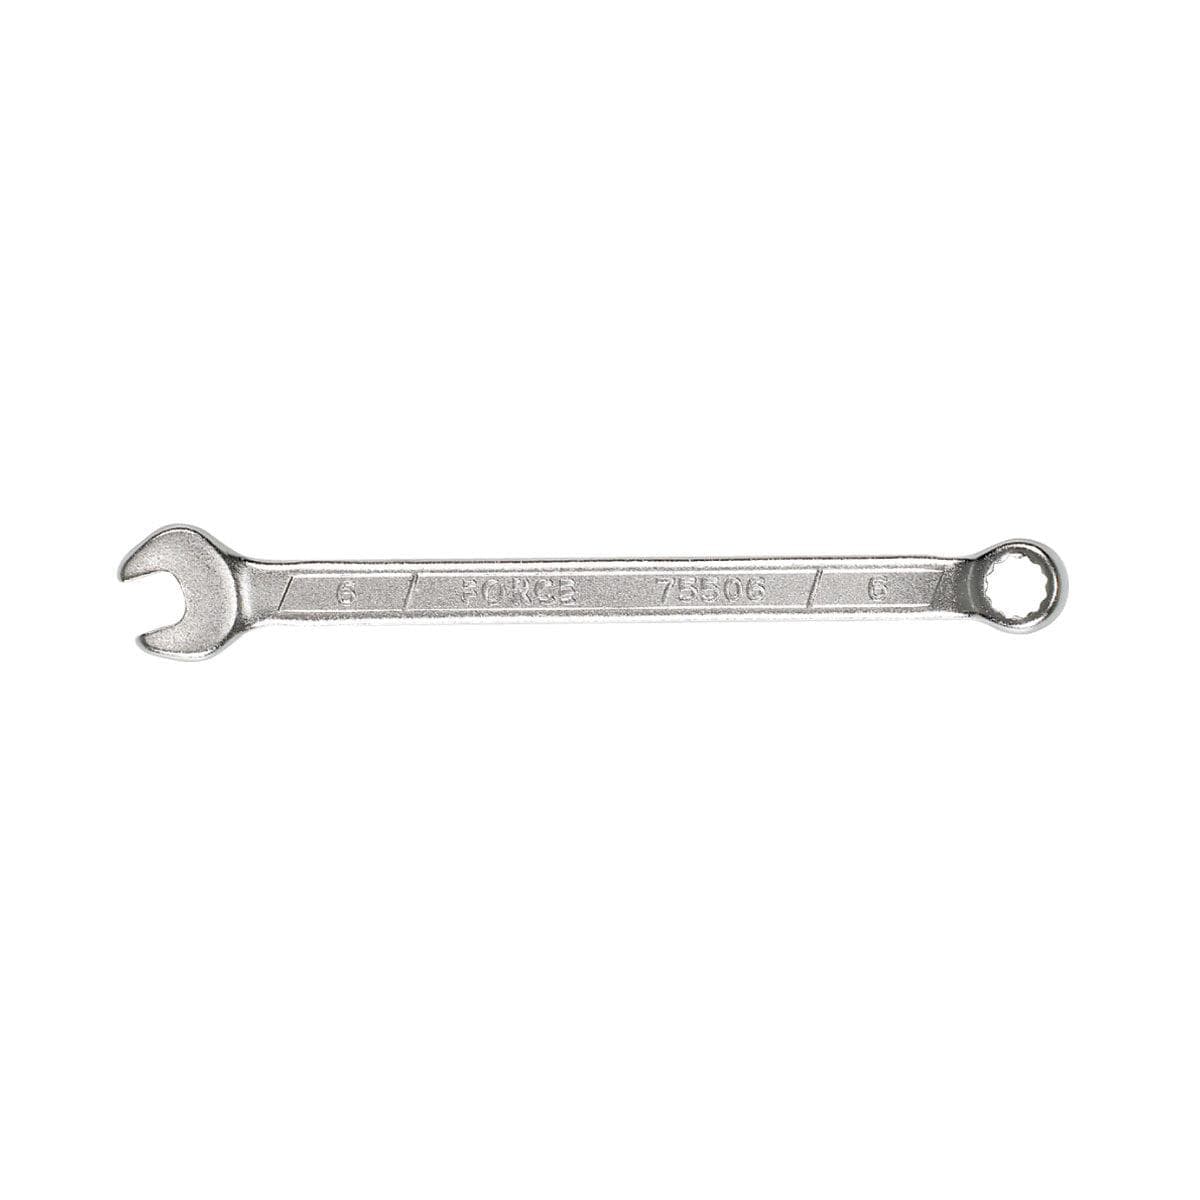 Cyclo 26Mm Open/Ring Spanner: